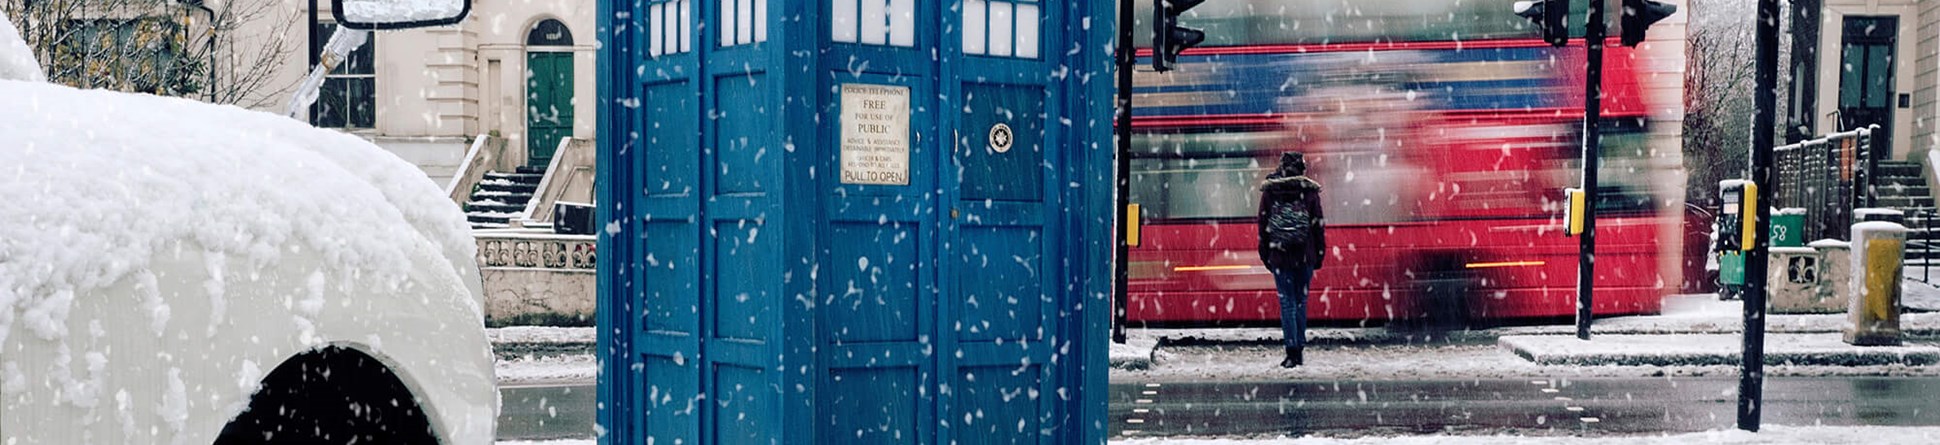 Tardis on snow covered pavement next to pelican crossing with pedestrian walking away over the crossing, pausing as a red double-decker bus passes. On left in foreground is the front right wheel an arch of a white car.